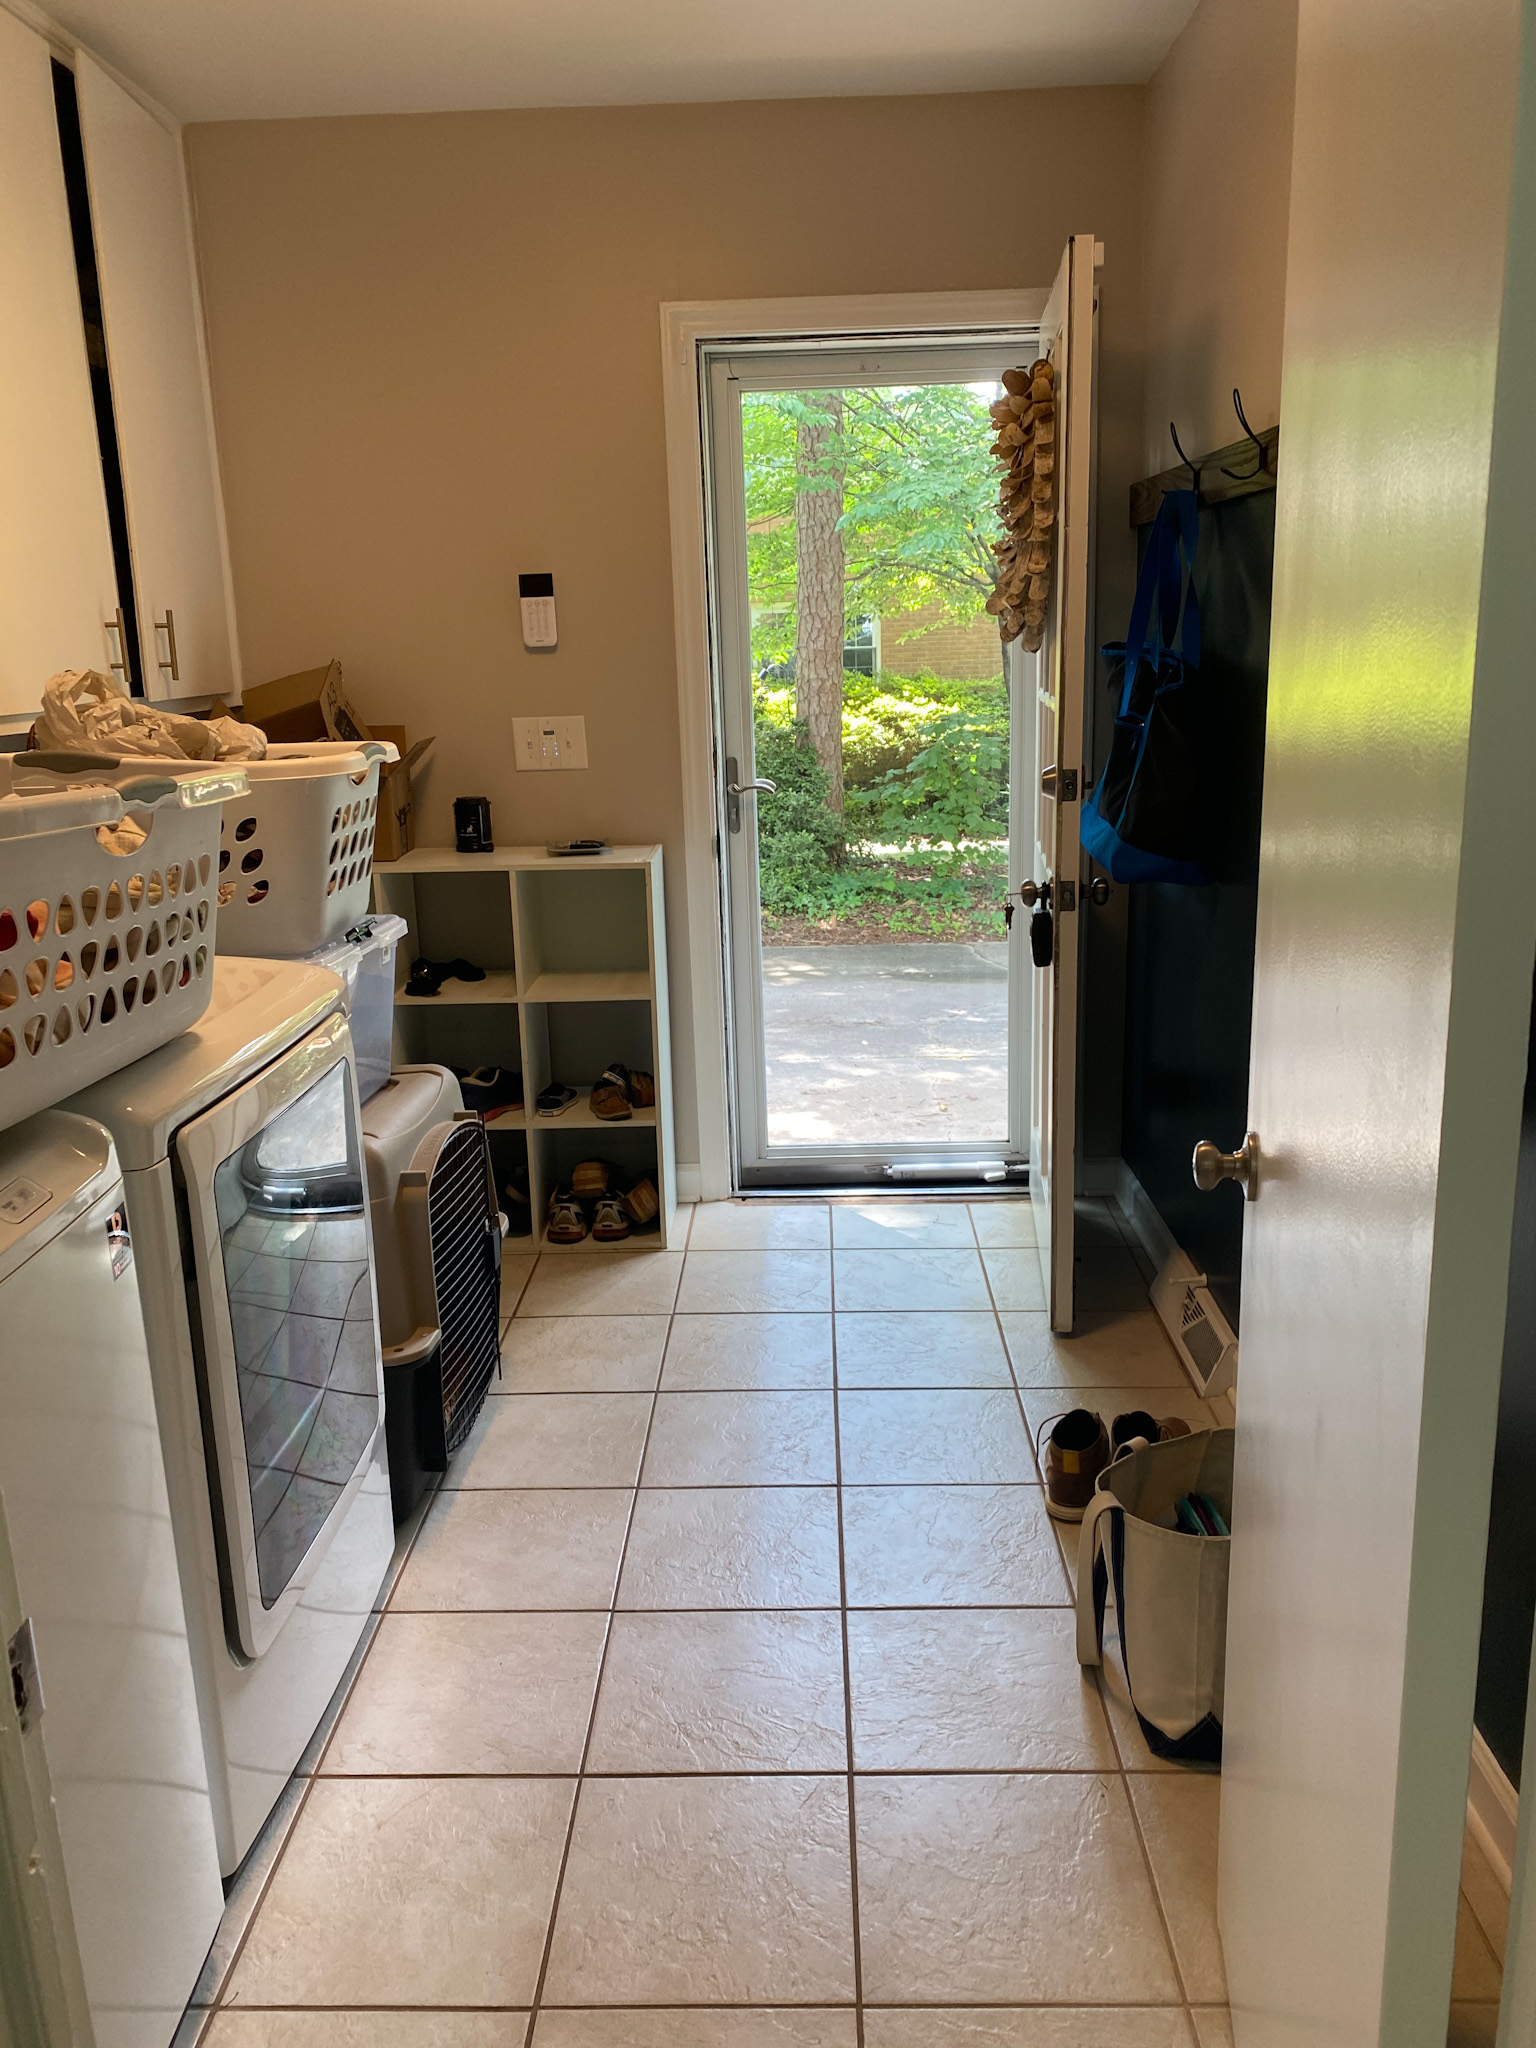 Before and After: The Laundry and Mud Room Reveal